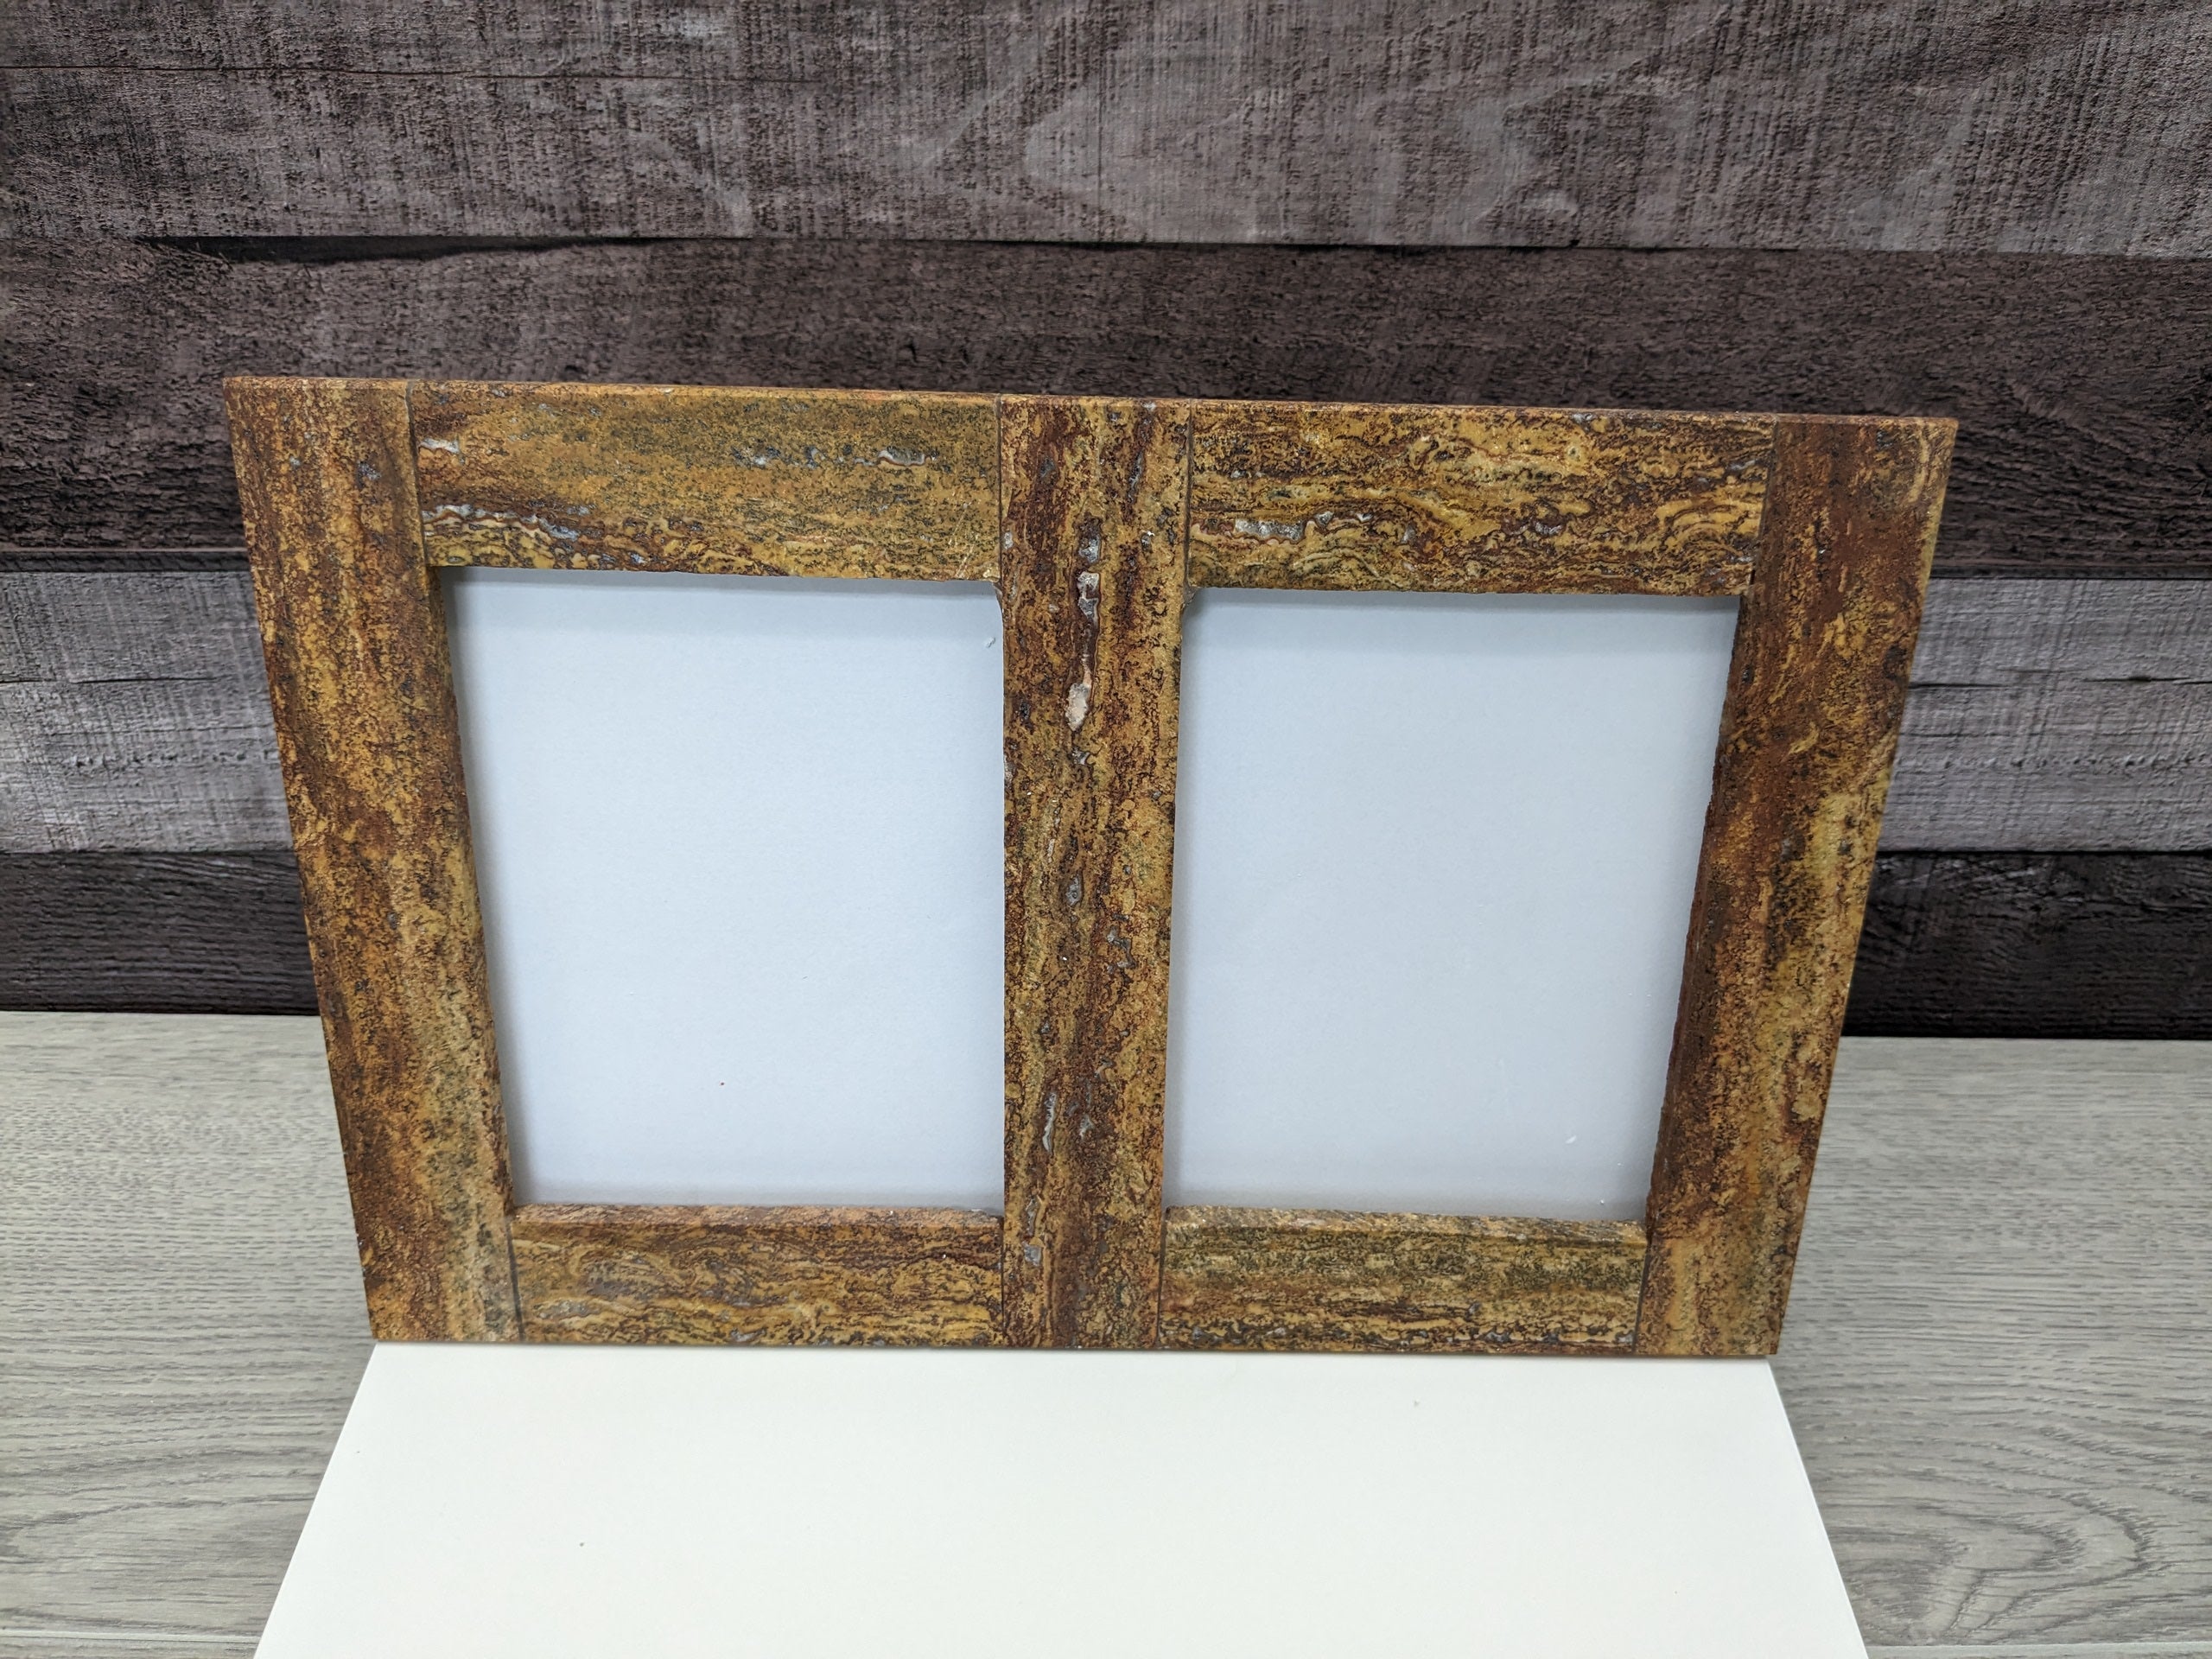 Brown Travertine Stone Double Frame. Handmade in Mexico. We package and ship from the USA. Buy now at www.felipeandgrace.com. 